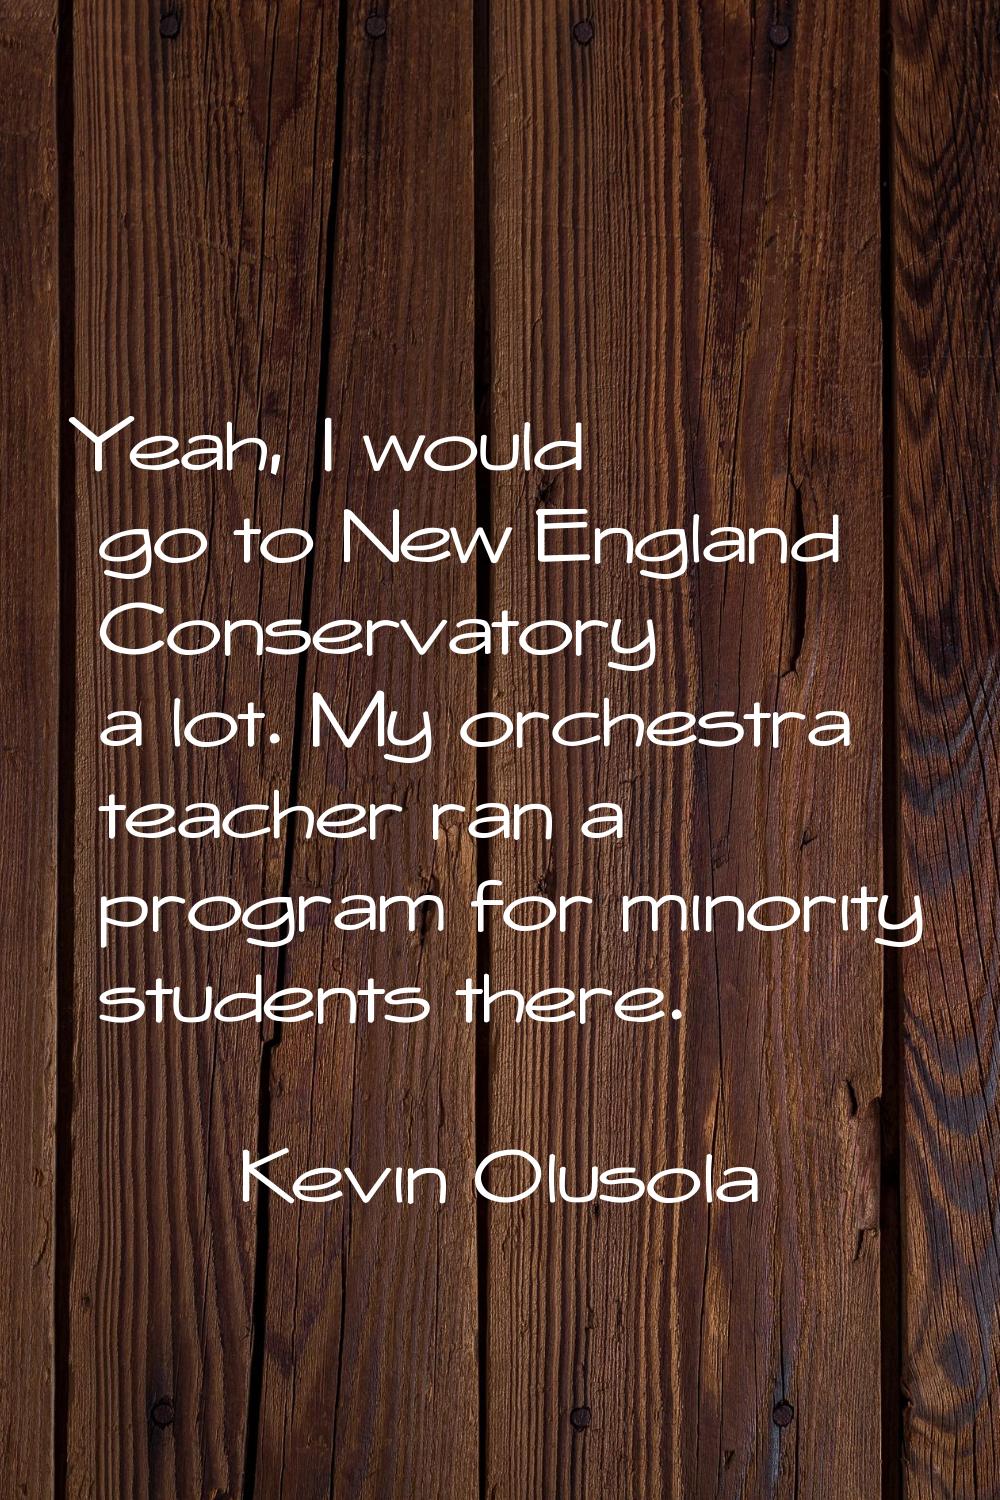 Yeah, I would go to New England Conservatory a lot. My orchestra teacher ran a program for minority